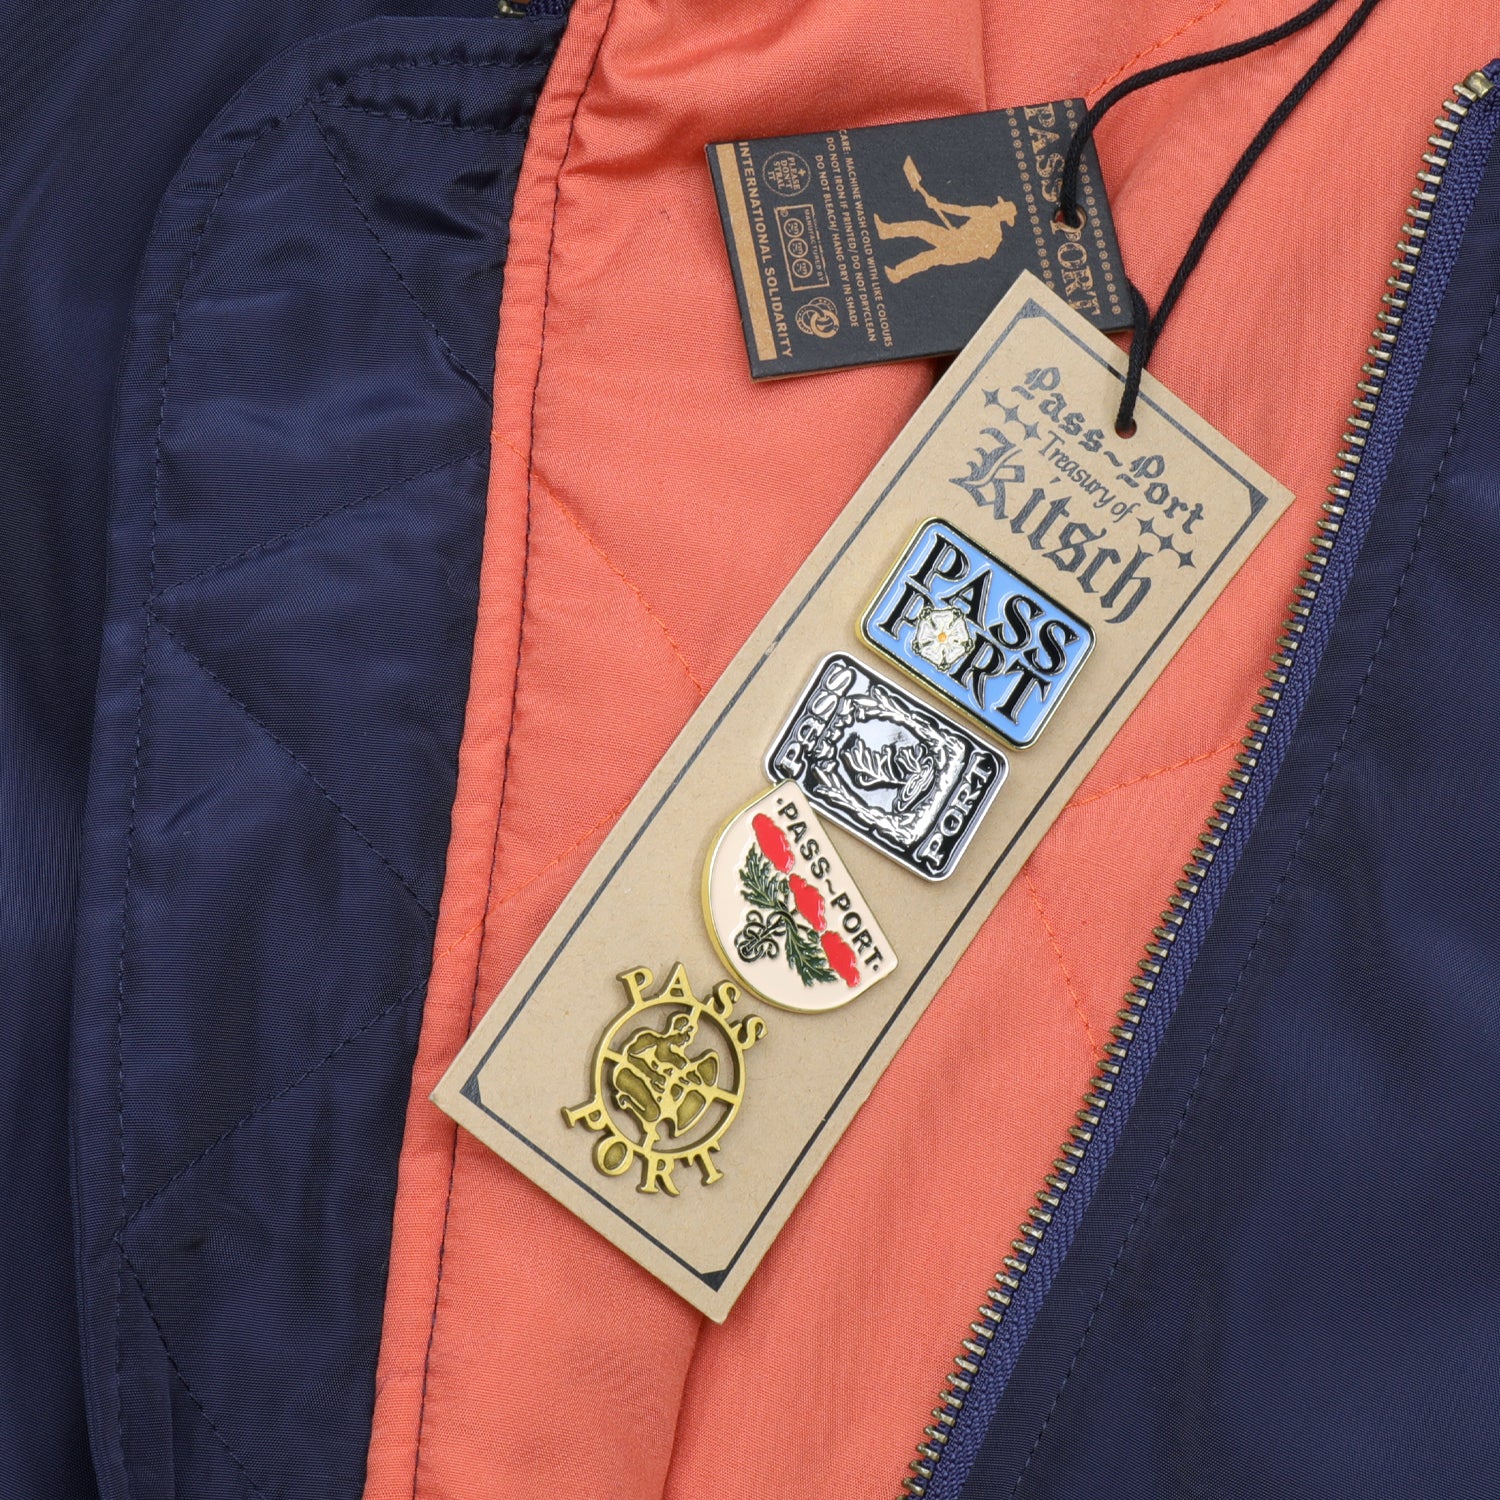 Pass~Port Crystal Embroidery Freight Jacket - Navy